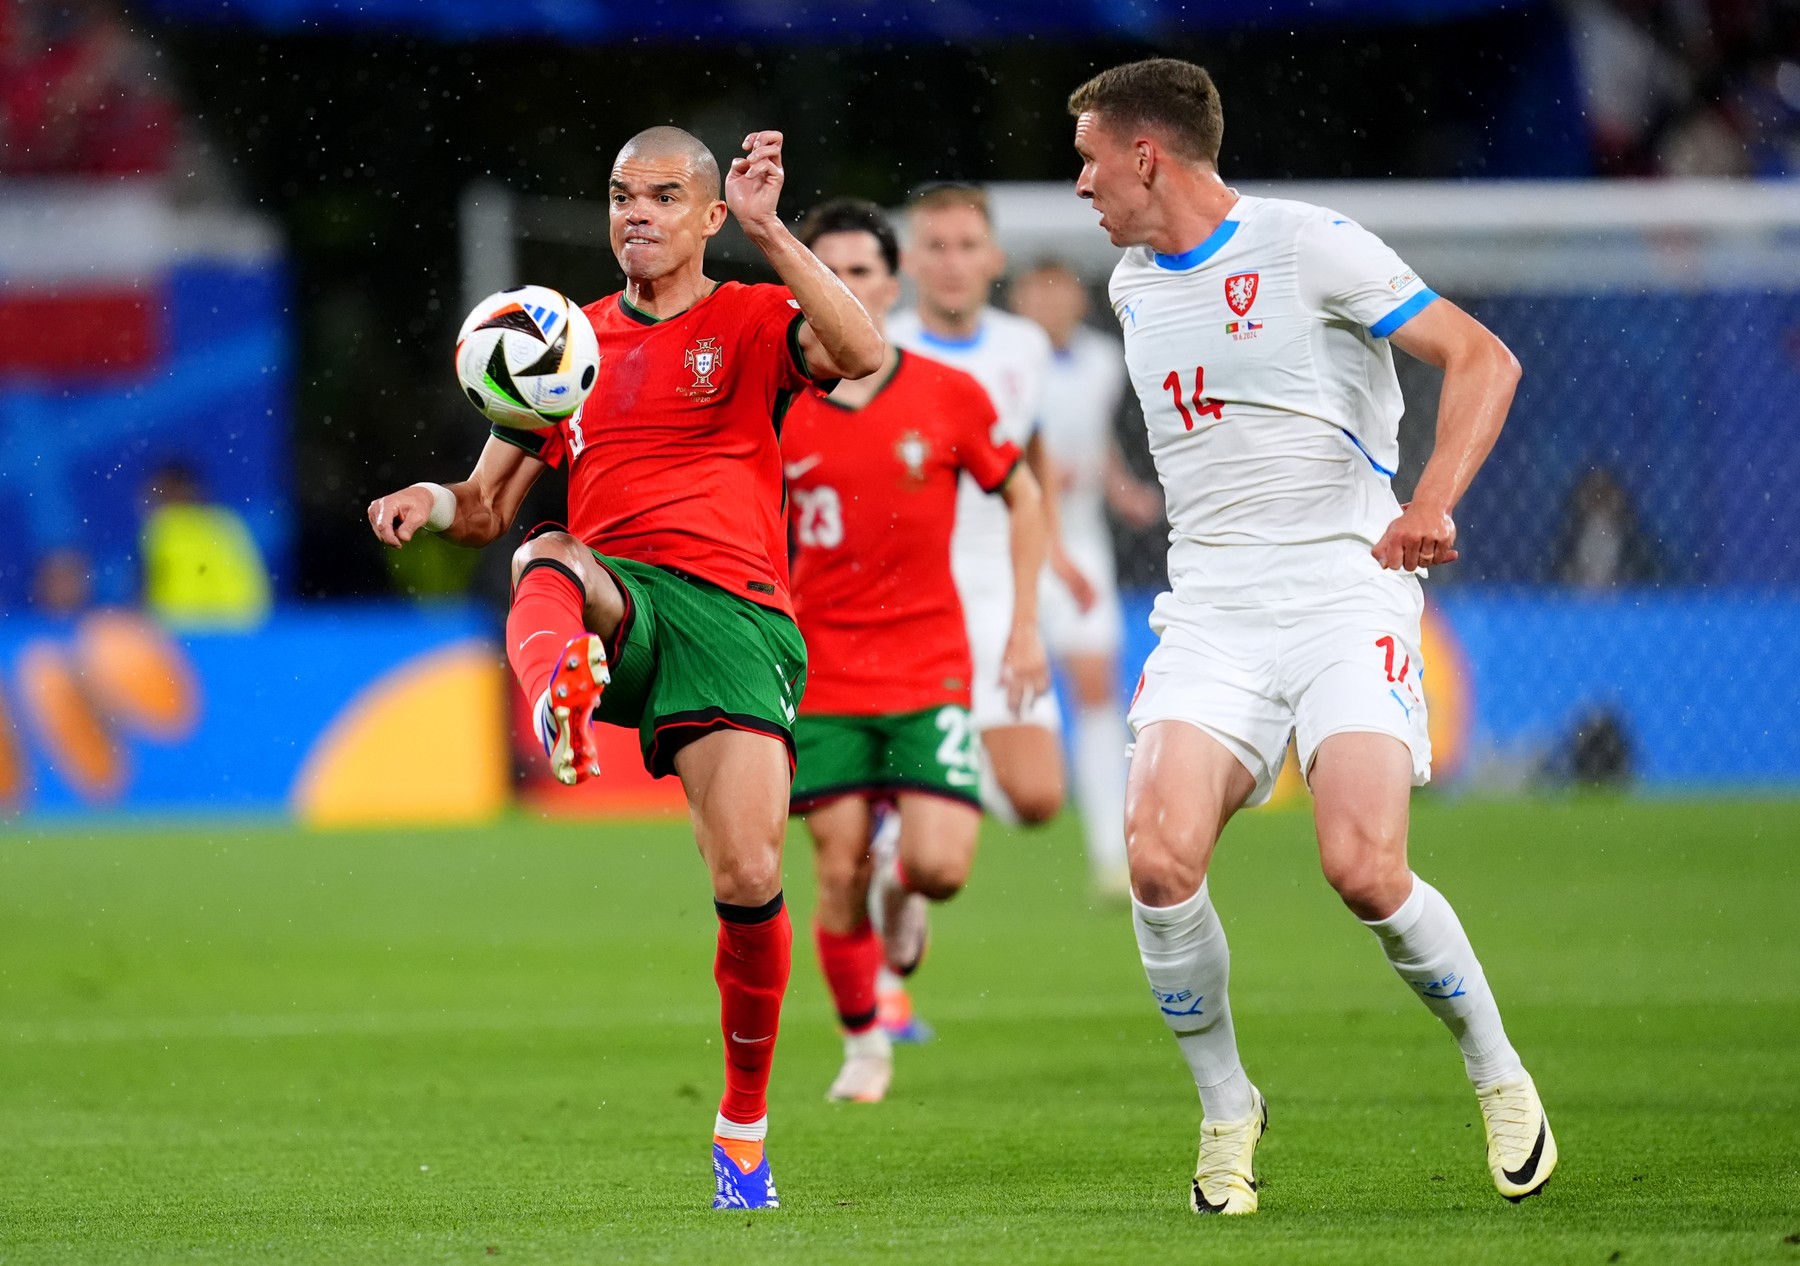 Portugal's Pepe (left) and Czech Republic's Lukas Provod battle for the ball during the UEFA Euro 2024 Group F match at Leipzig Stadium in Leipzig, Germany. Picture date: Tuesday June 18, 2024.,Image: 882738703, License: Rights-managed, Restrictions: Use subject to restrictions. Editorial use only, no commercial use without prior consent from rights holder., Model Release: no, Credit line: Adam Davy / PA Images / Profimedia